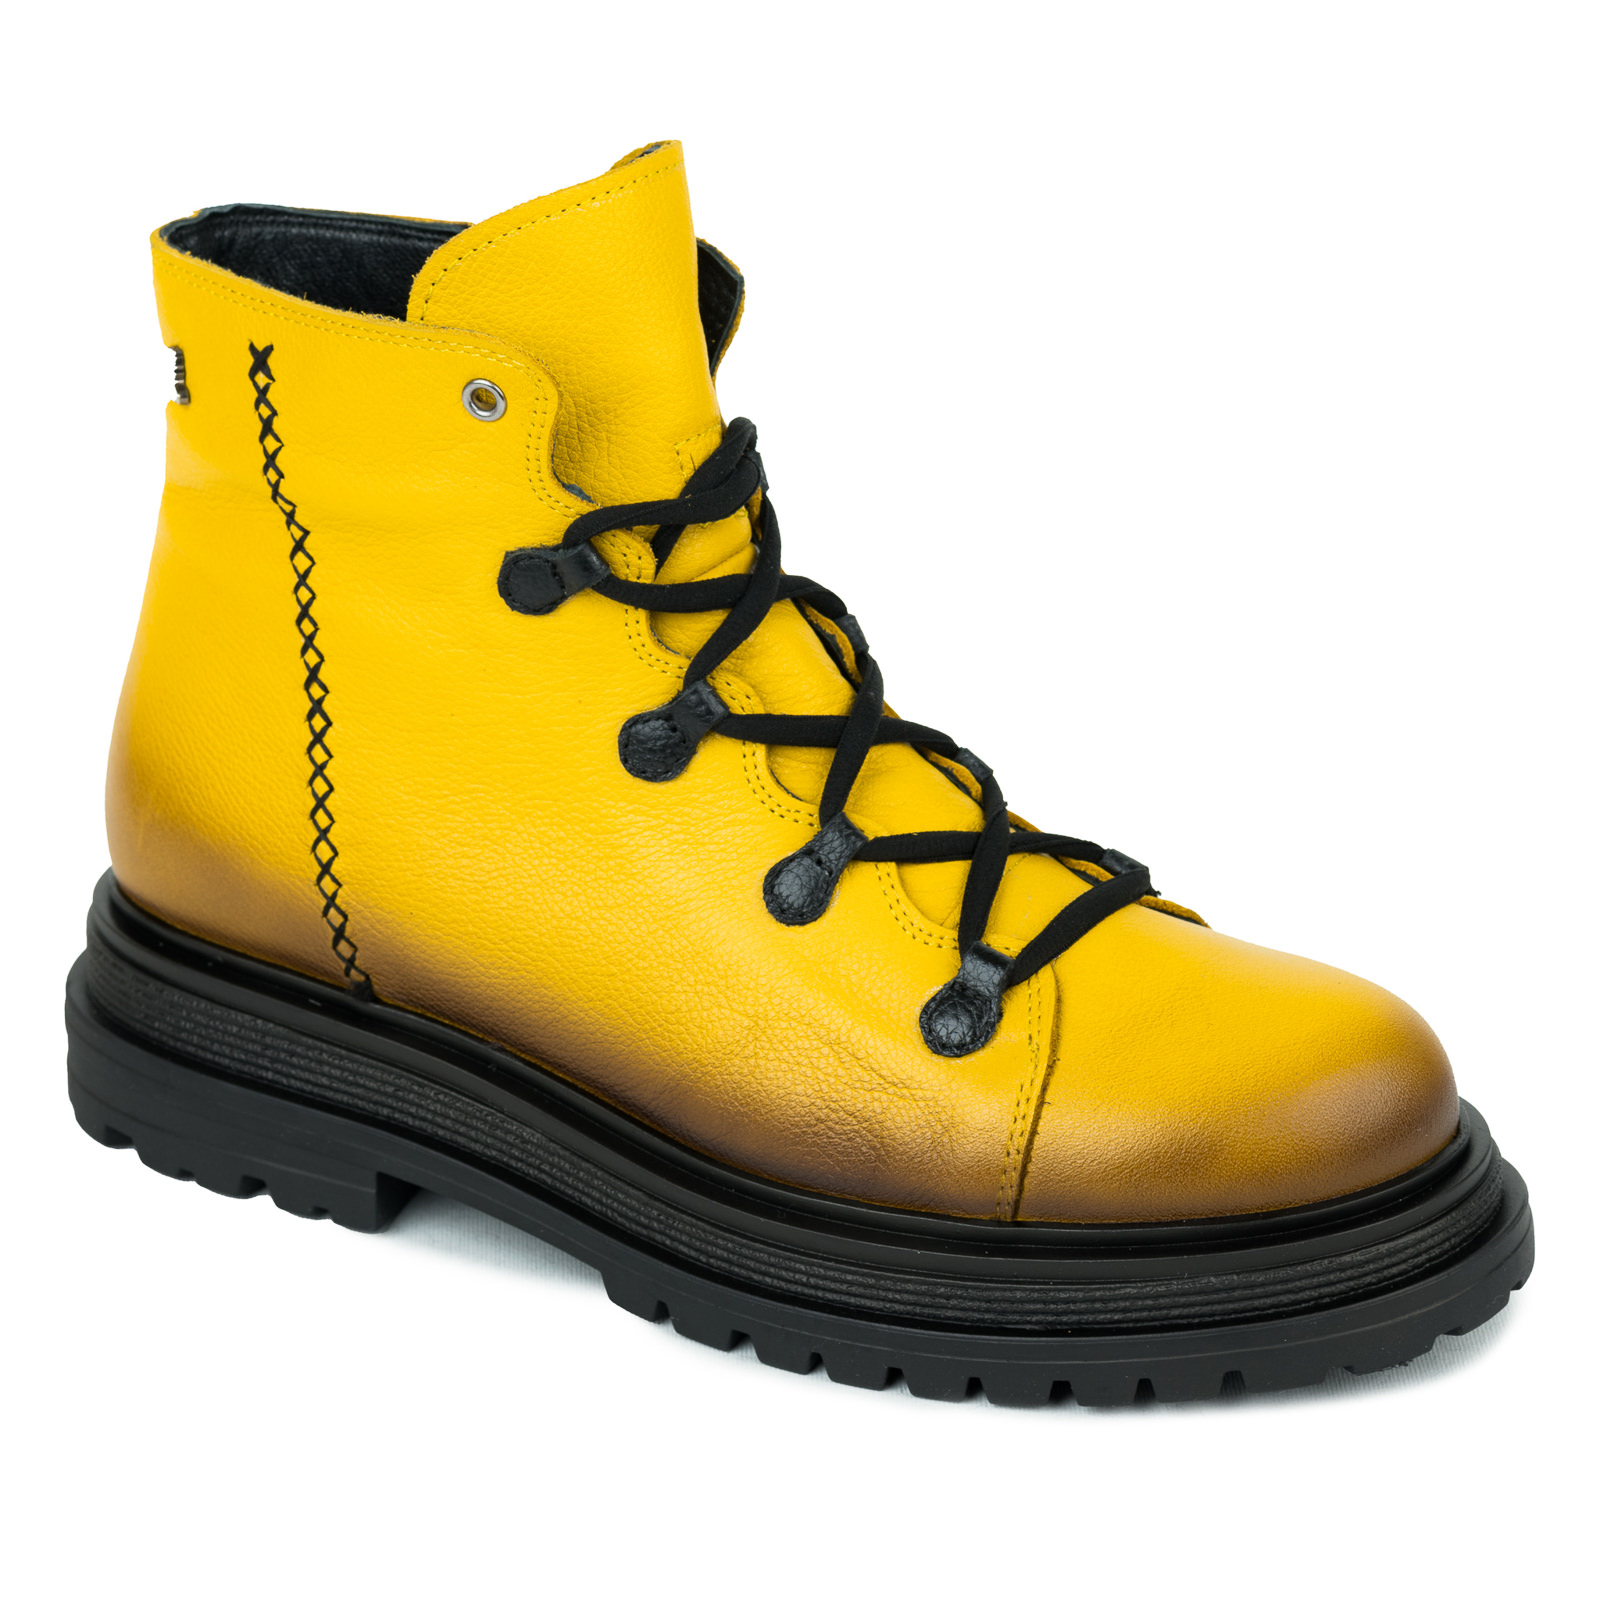 Leather ankle boots B440 - YELLOW